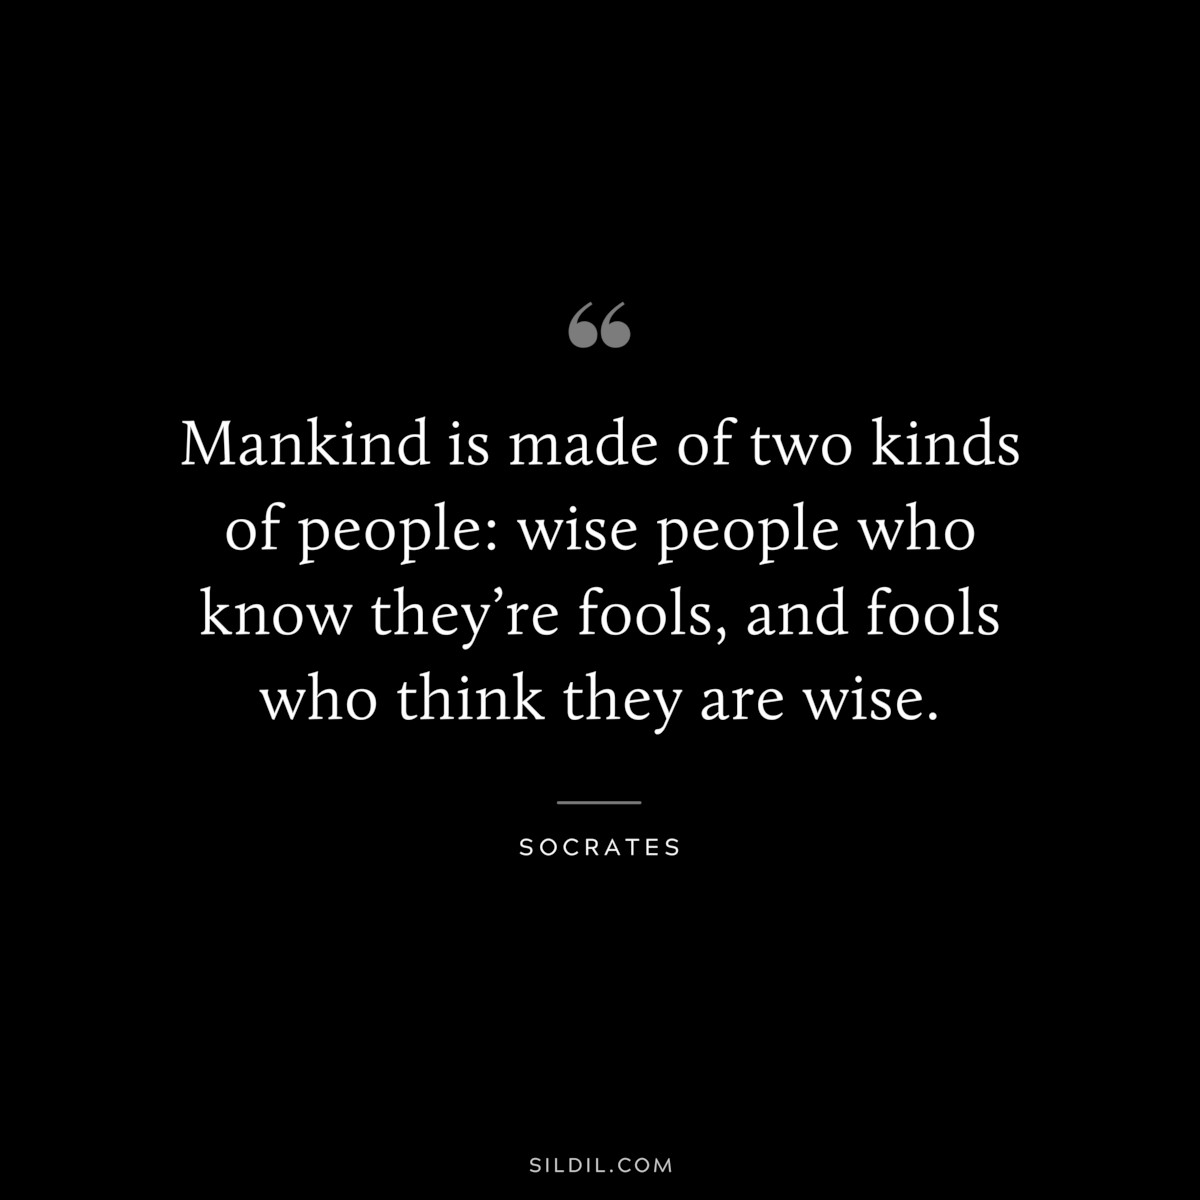 Mankind is made of two kinds of people: wise people who know they’re fools, and fools who think they are wise. ― Socrates